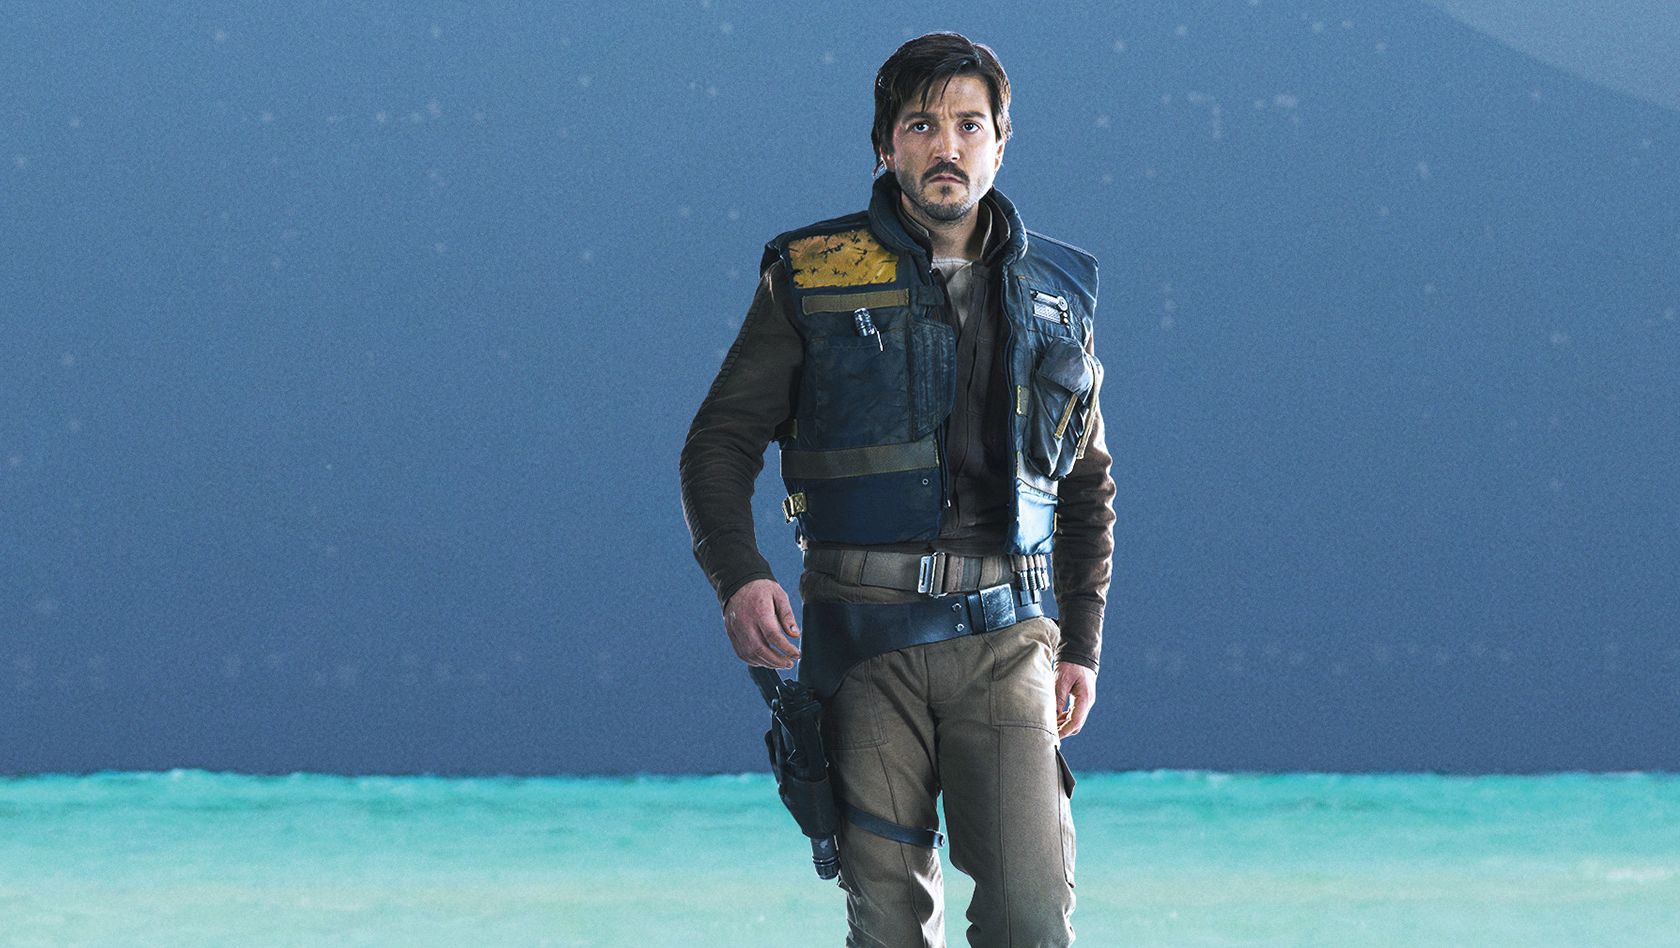 Cassian Andor wallpaper for desktop, download free Cassian Andor picture and background for PC